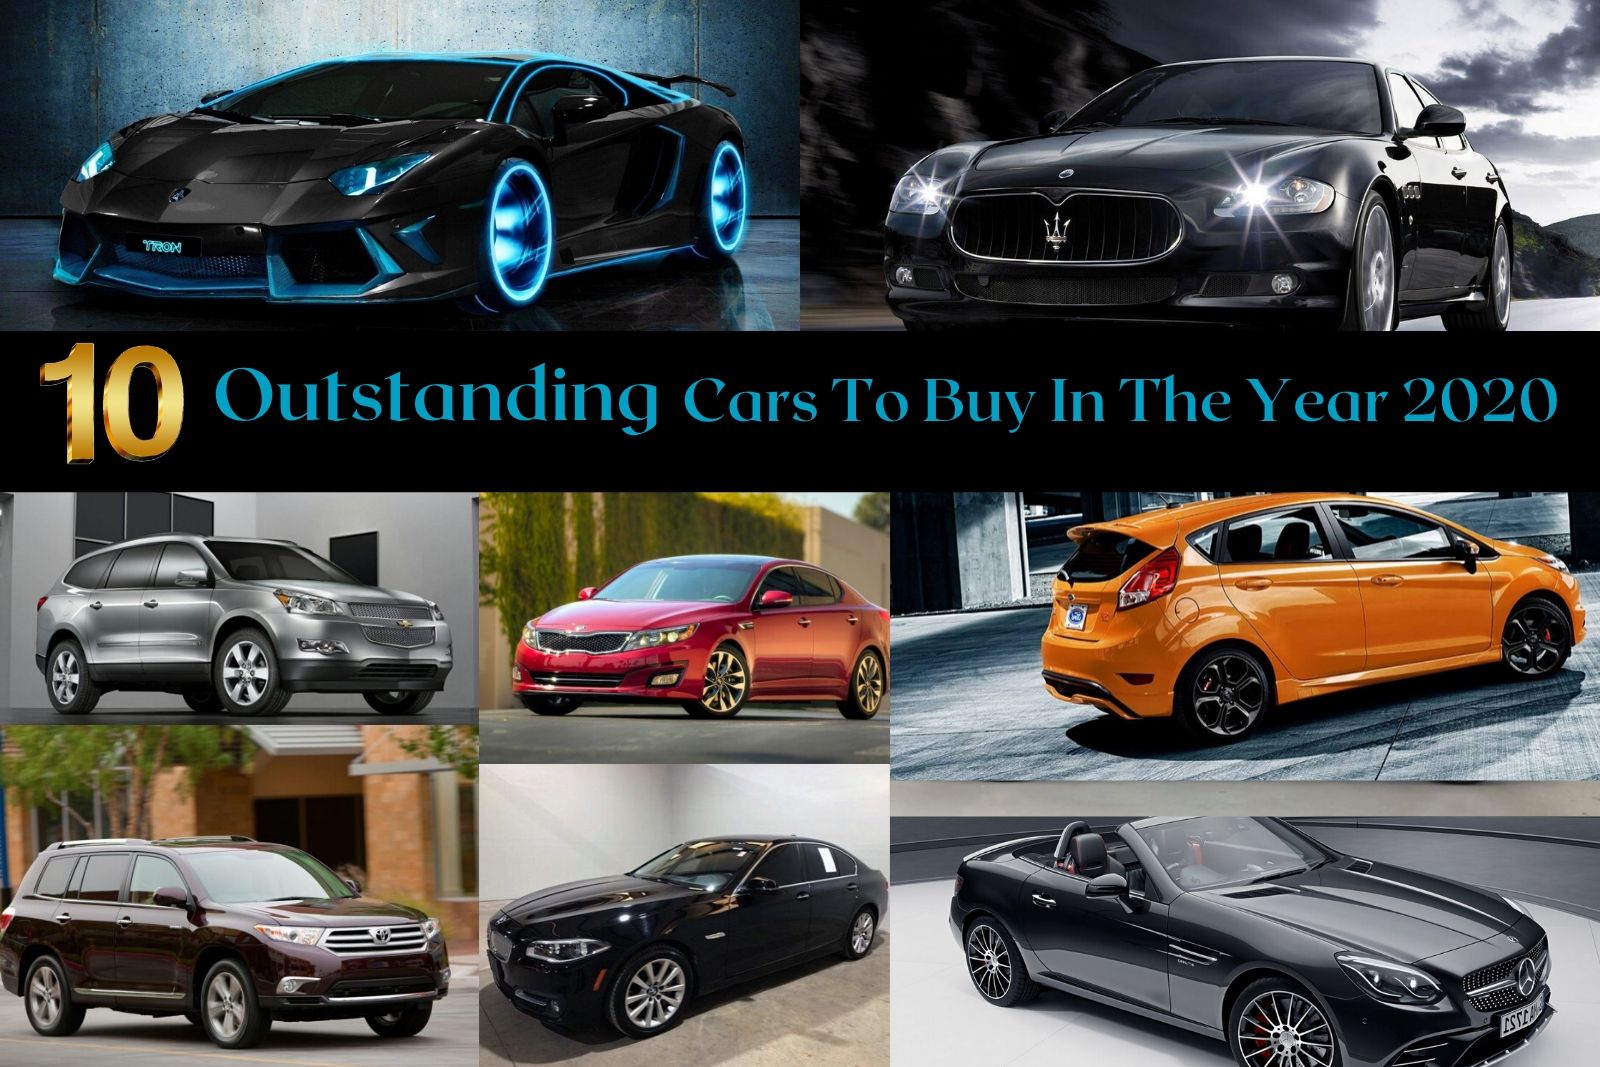 10 Outstanding Cars To Buy In The Year 2020